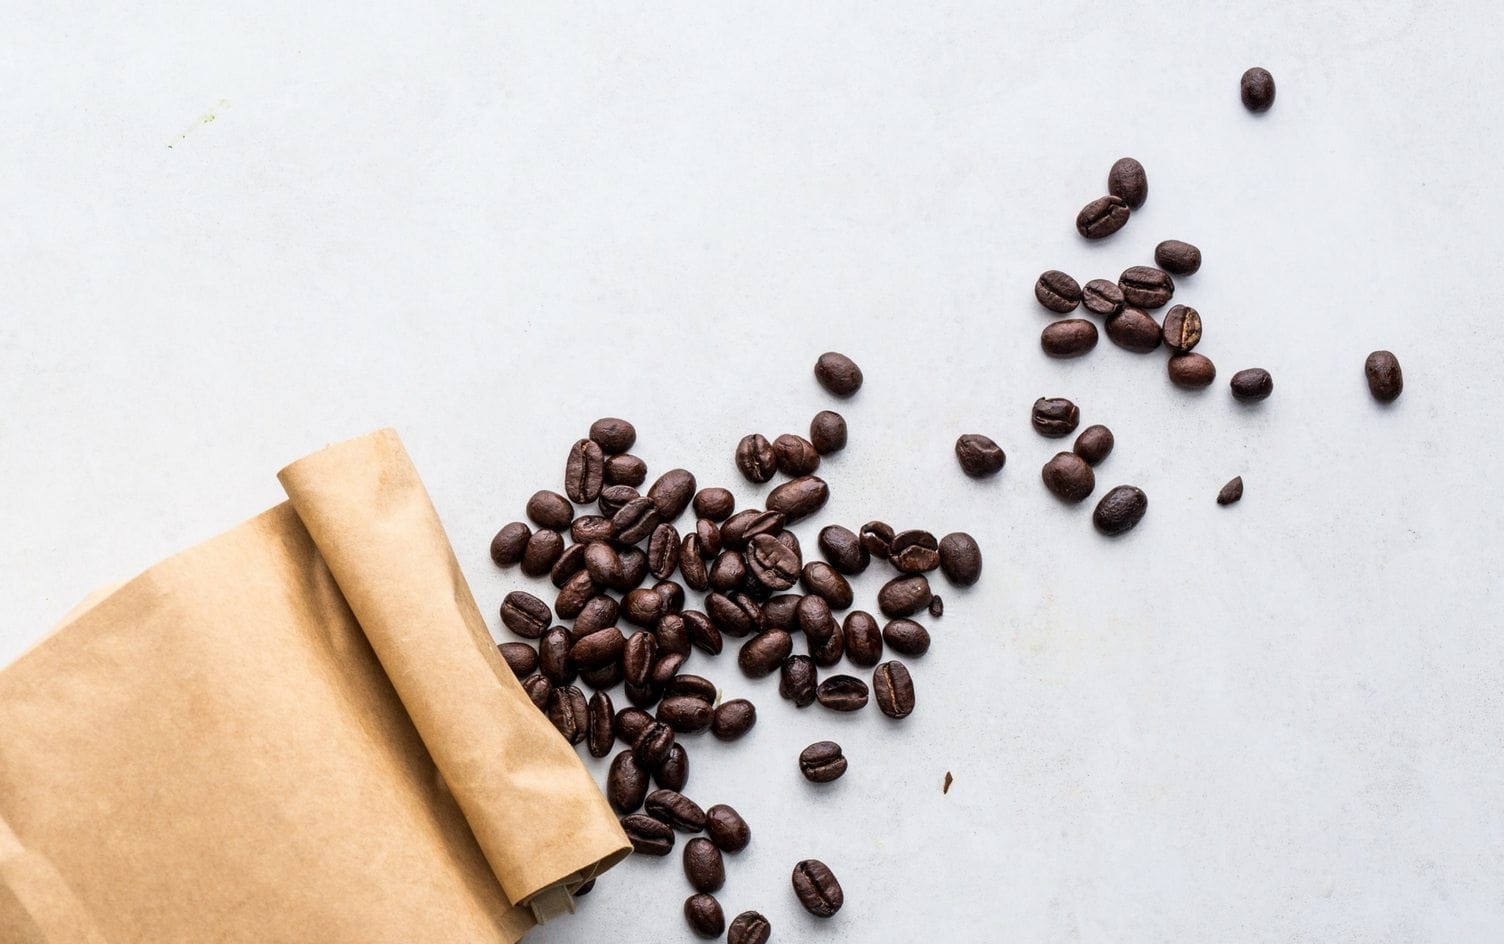 A brown paper bag tipped over on a white surface with coffee beans spilling out, fueling trends in minimalist kitchen aesthetics. The coffee beans are scattered in various positions on the surface around the bag. MyFitnessPal Blog